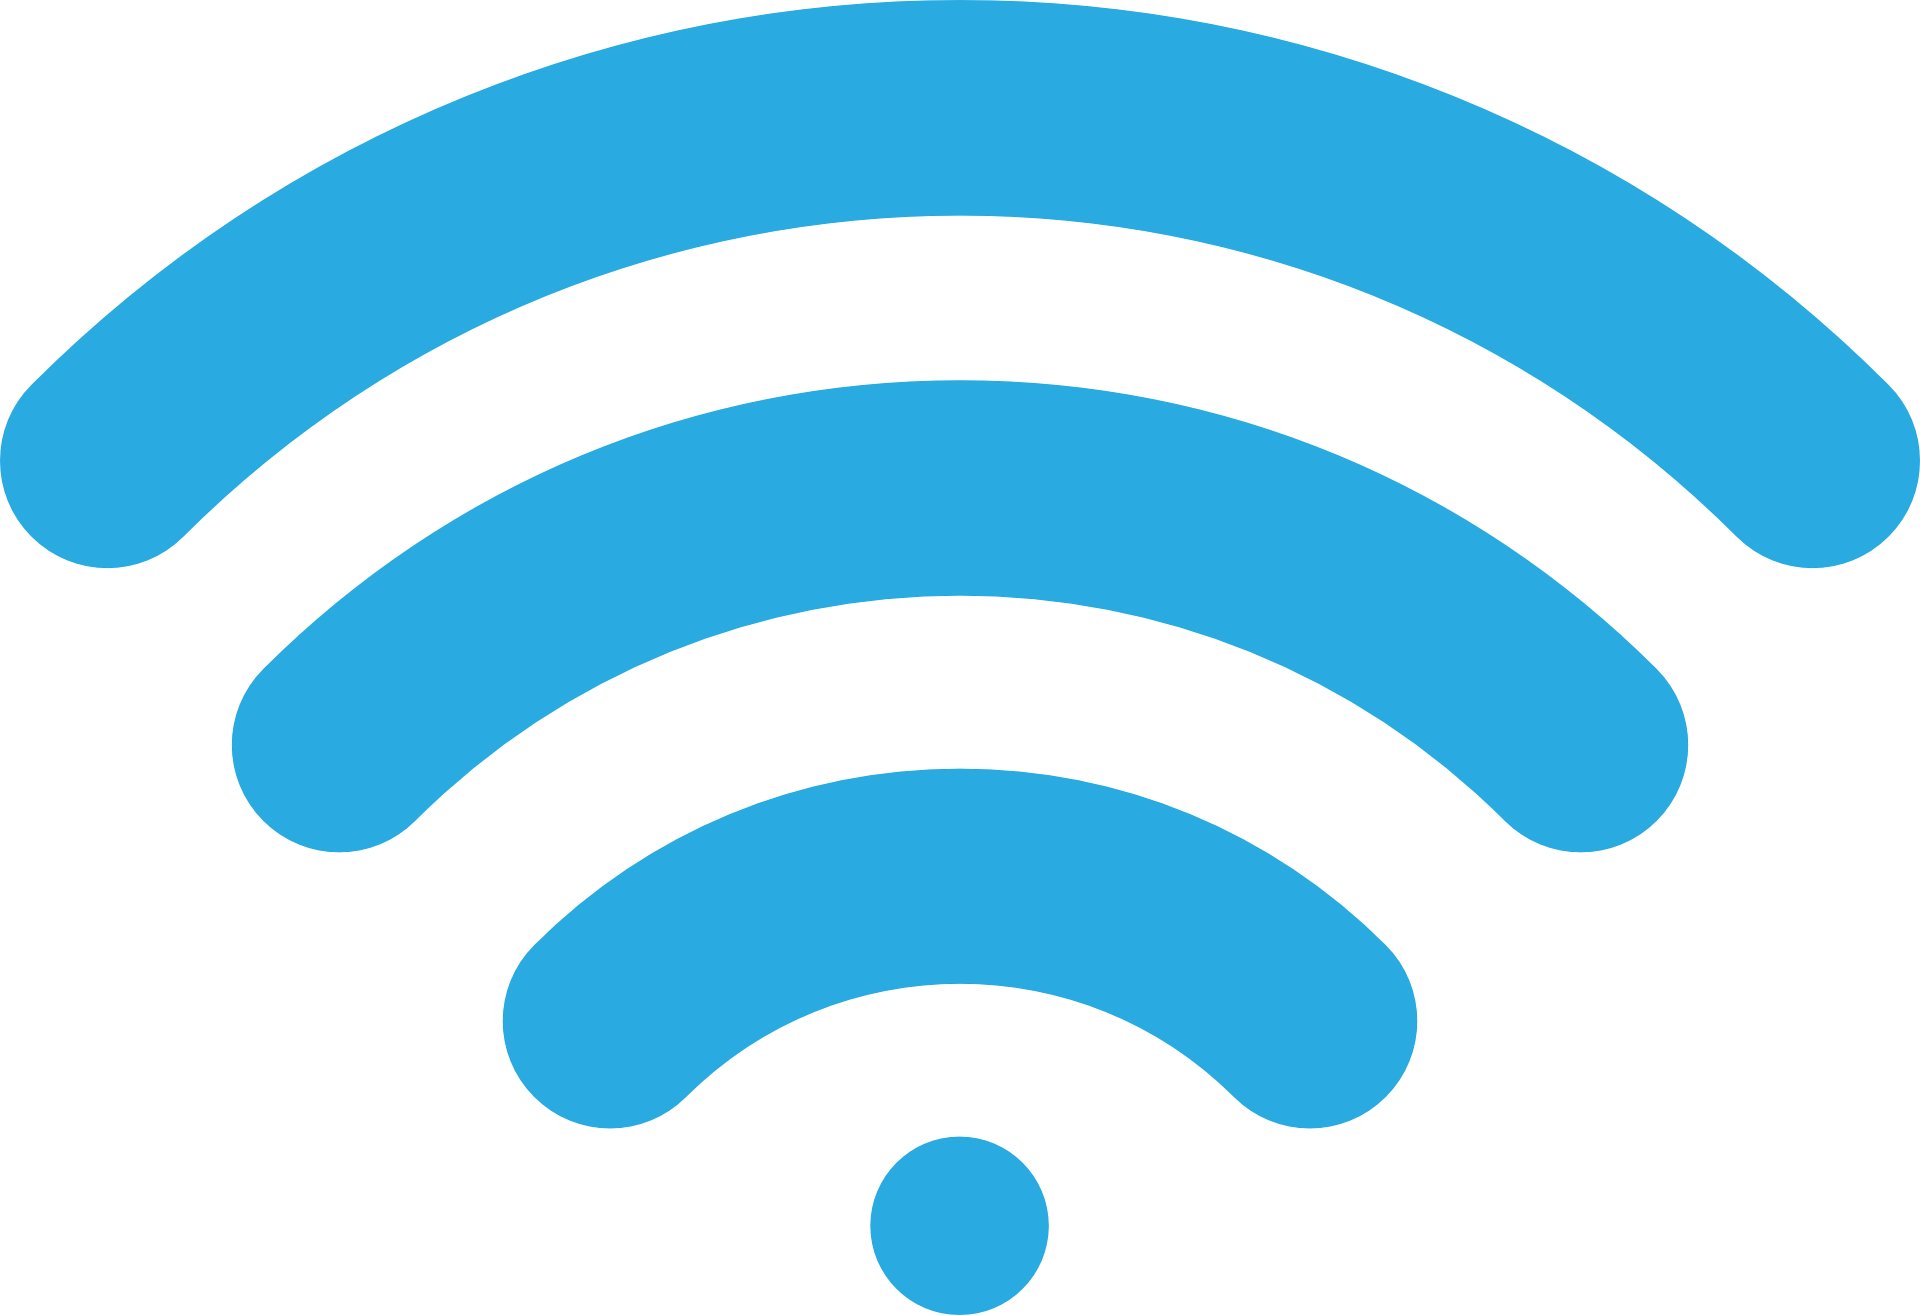 5G Wi-Fi (802.11ac) explained: It's cool - CNET